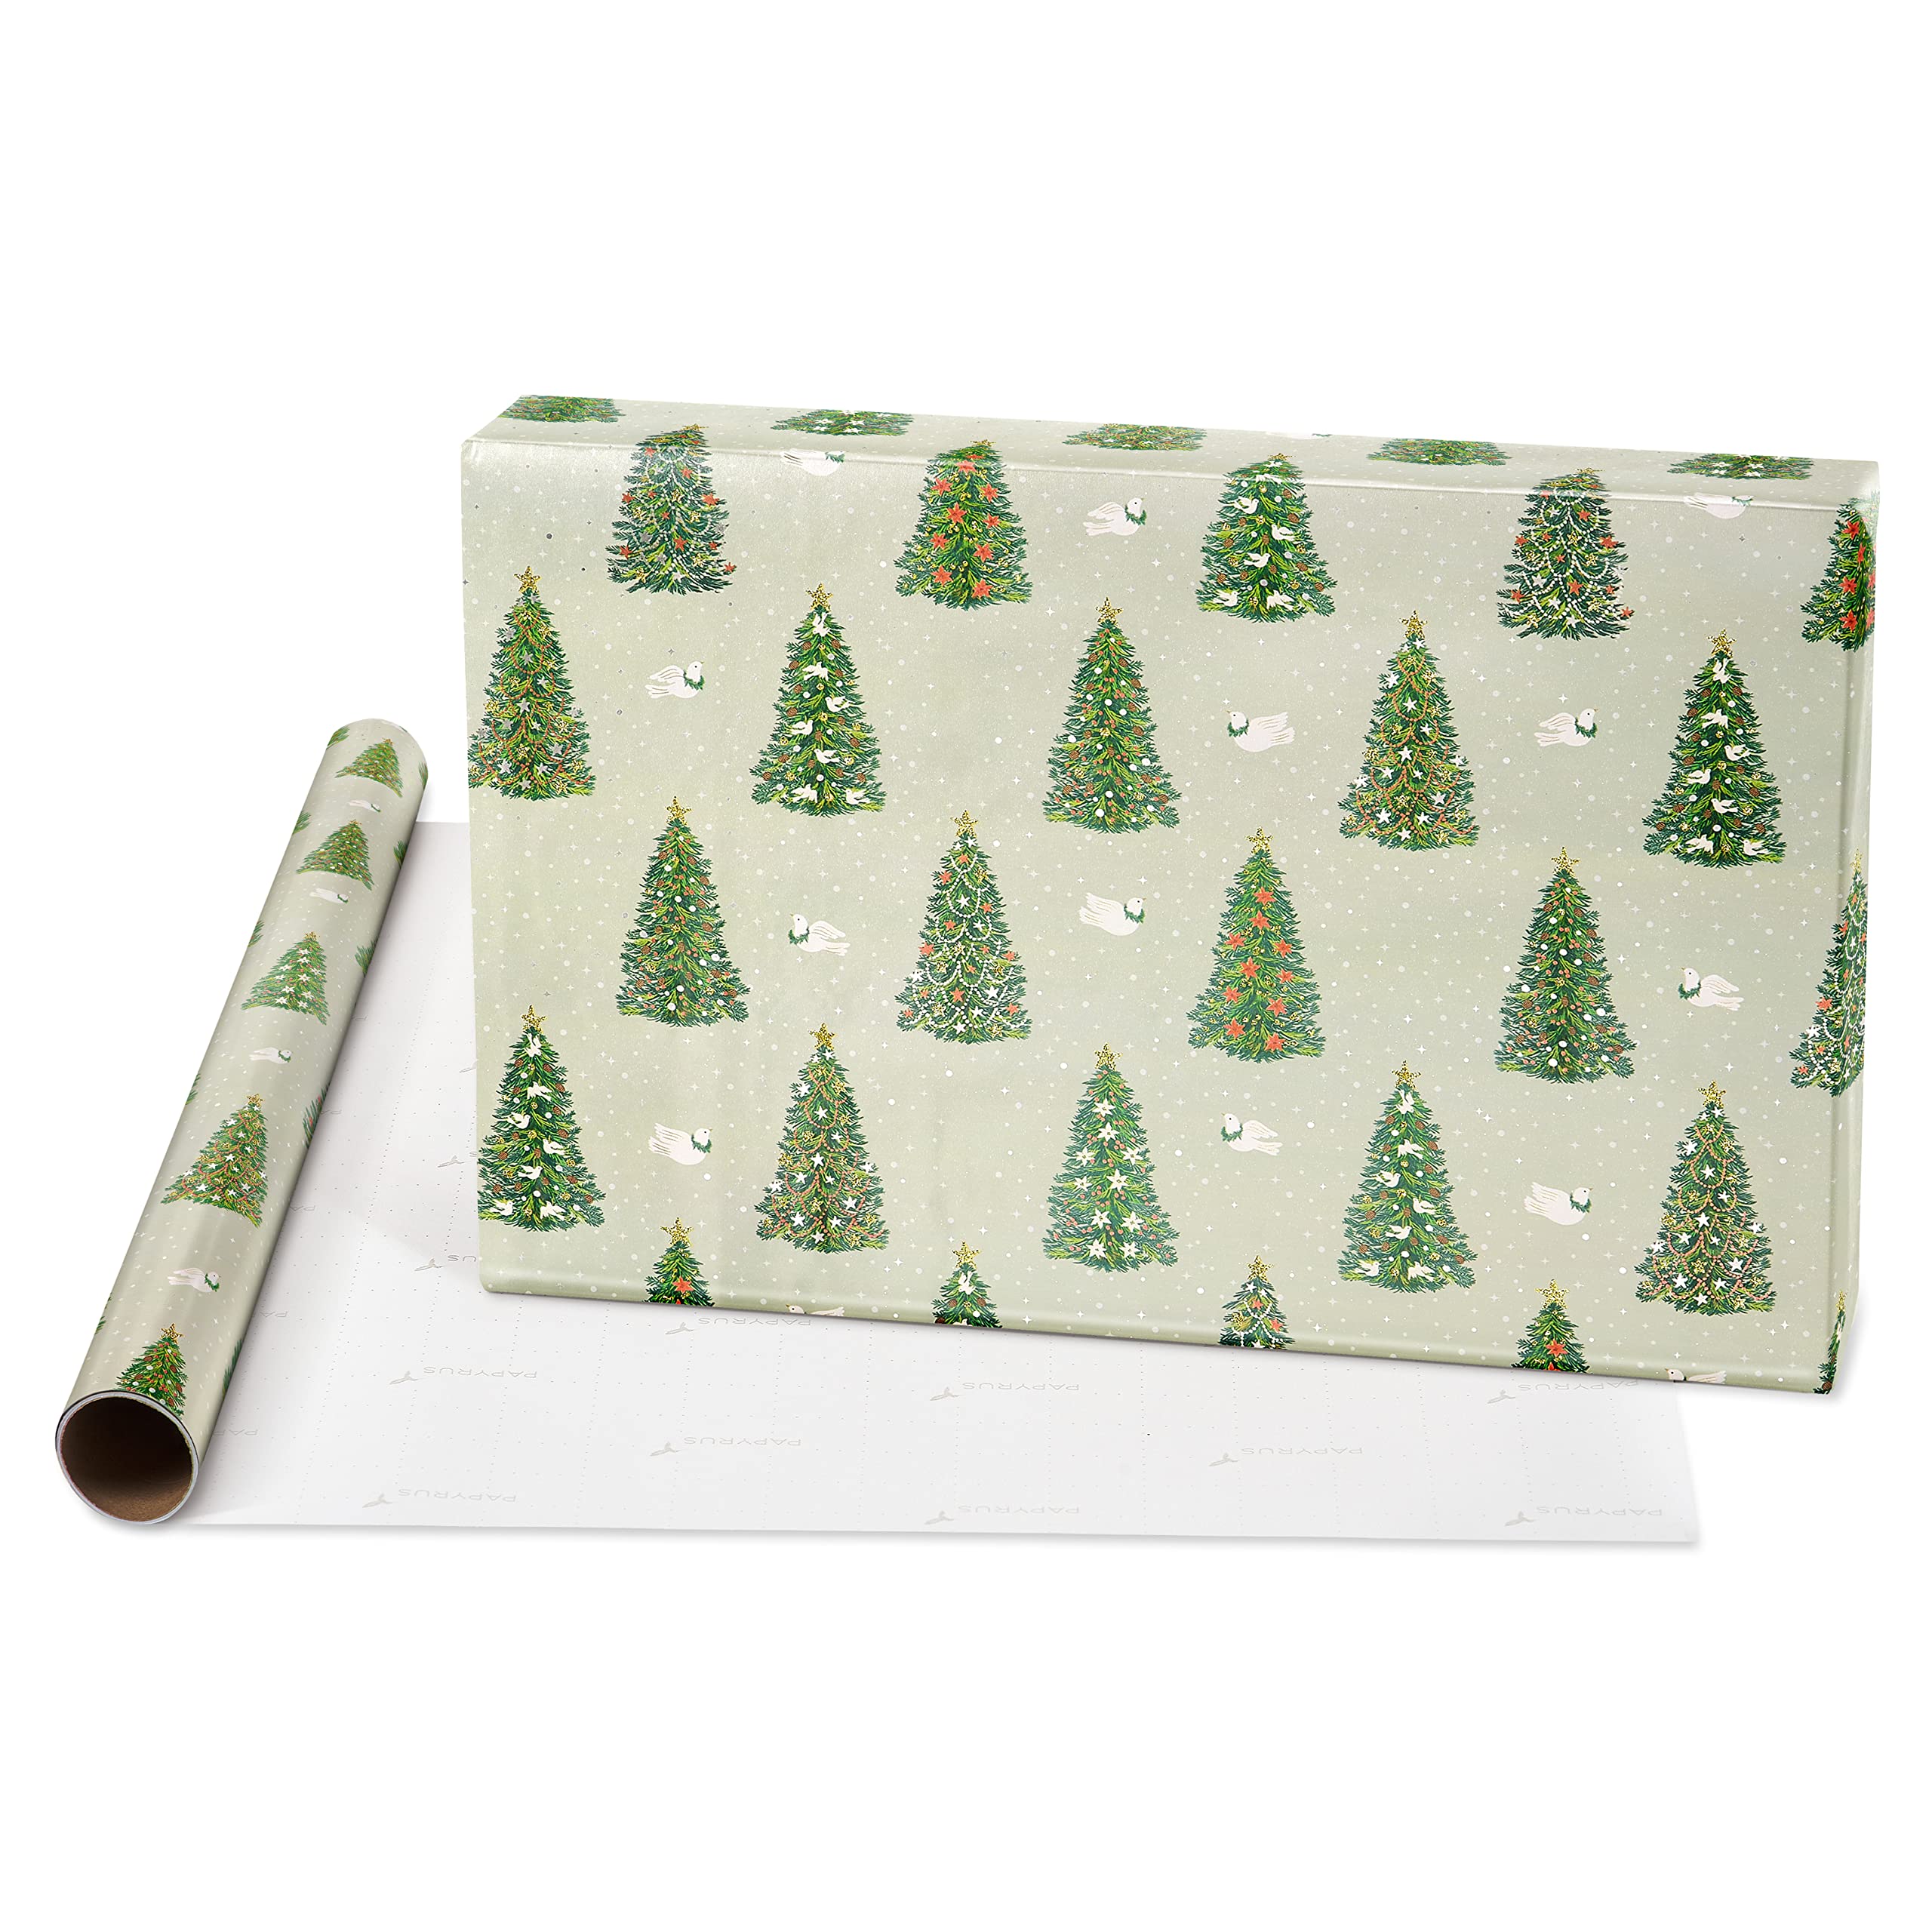 Papyrus Christmas Wrapping Paper Bundle, Gold Holly, Christmas Trees, White Floral (3 Rolls 70 sq. ft)